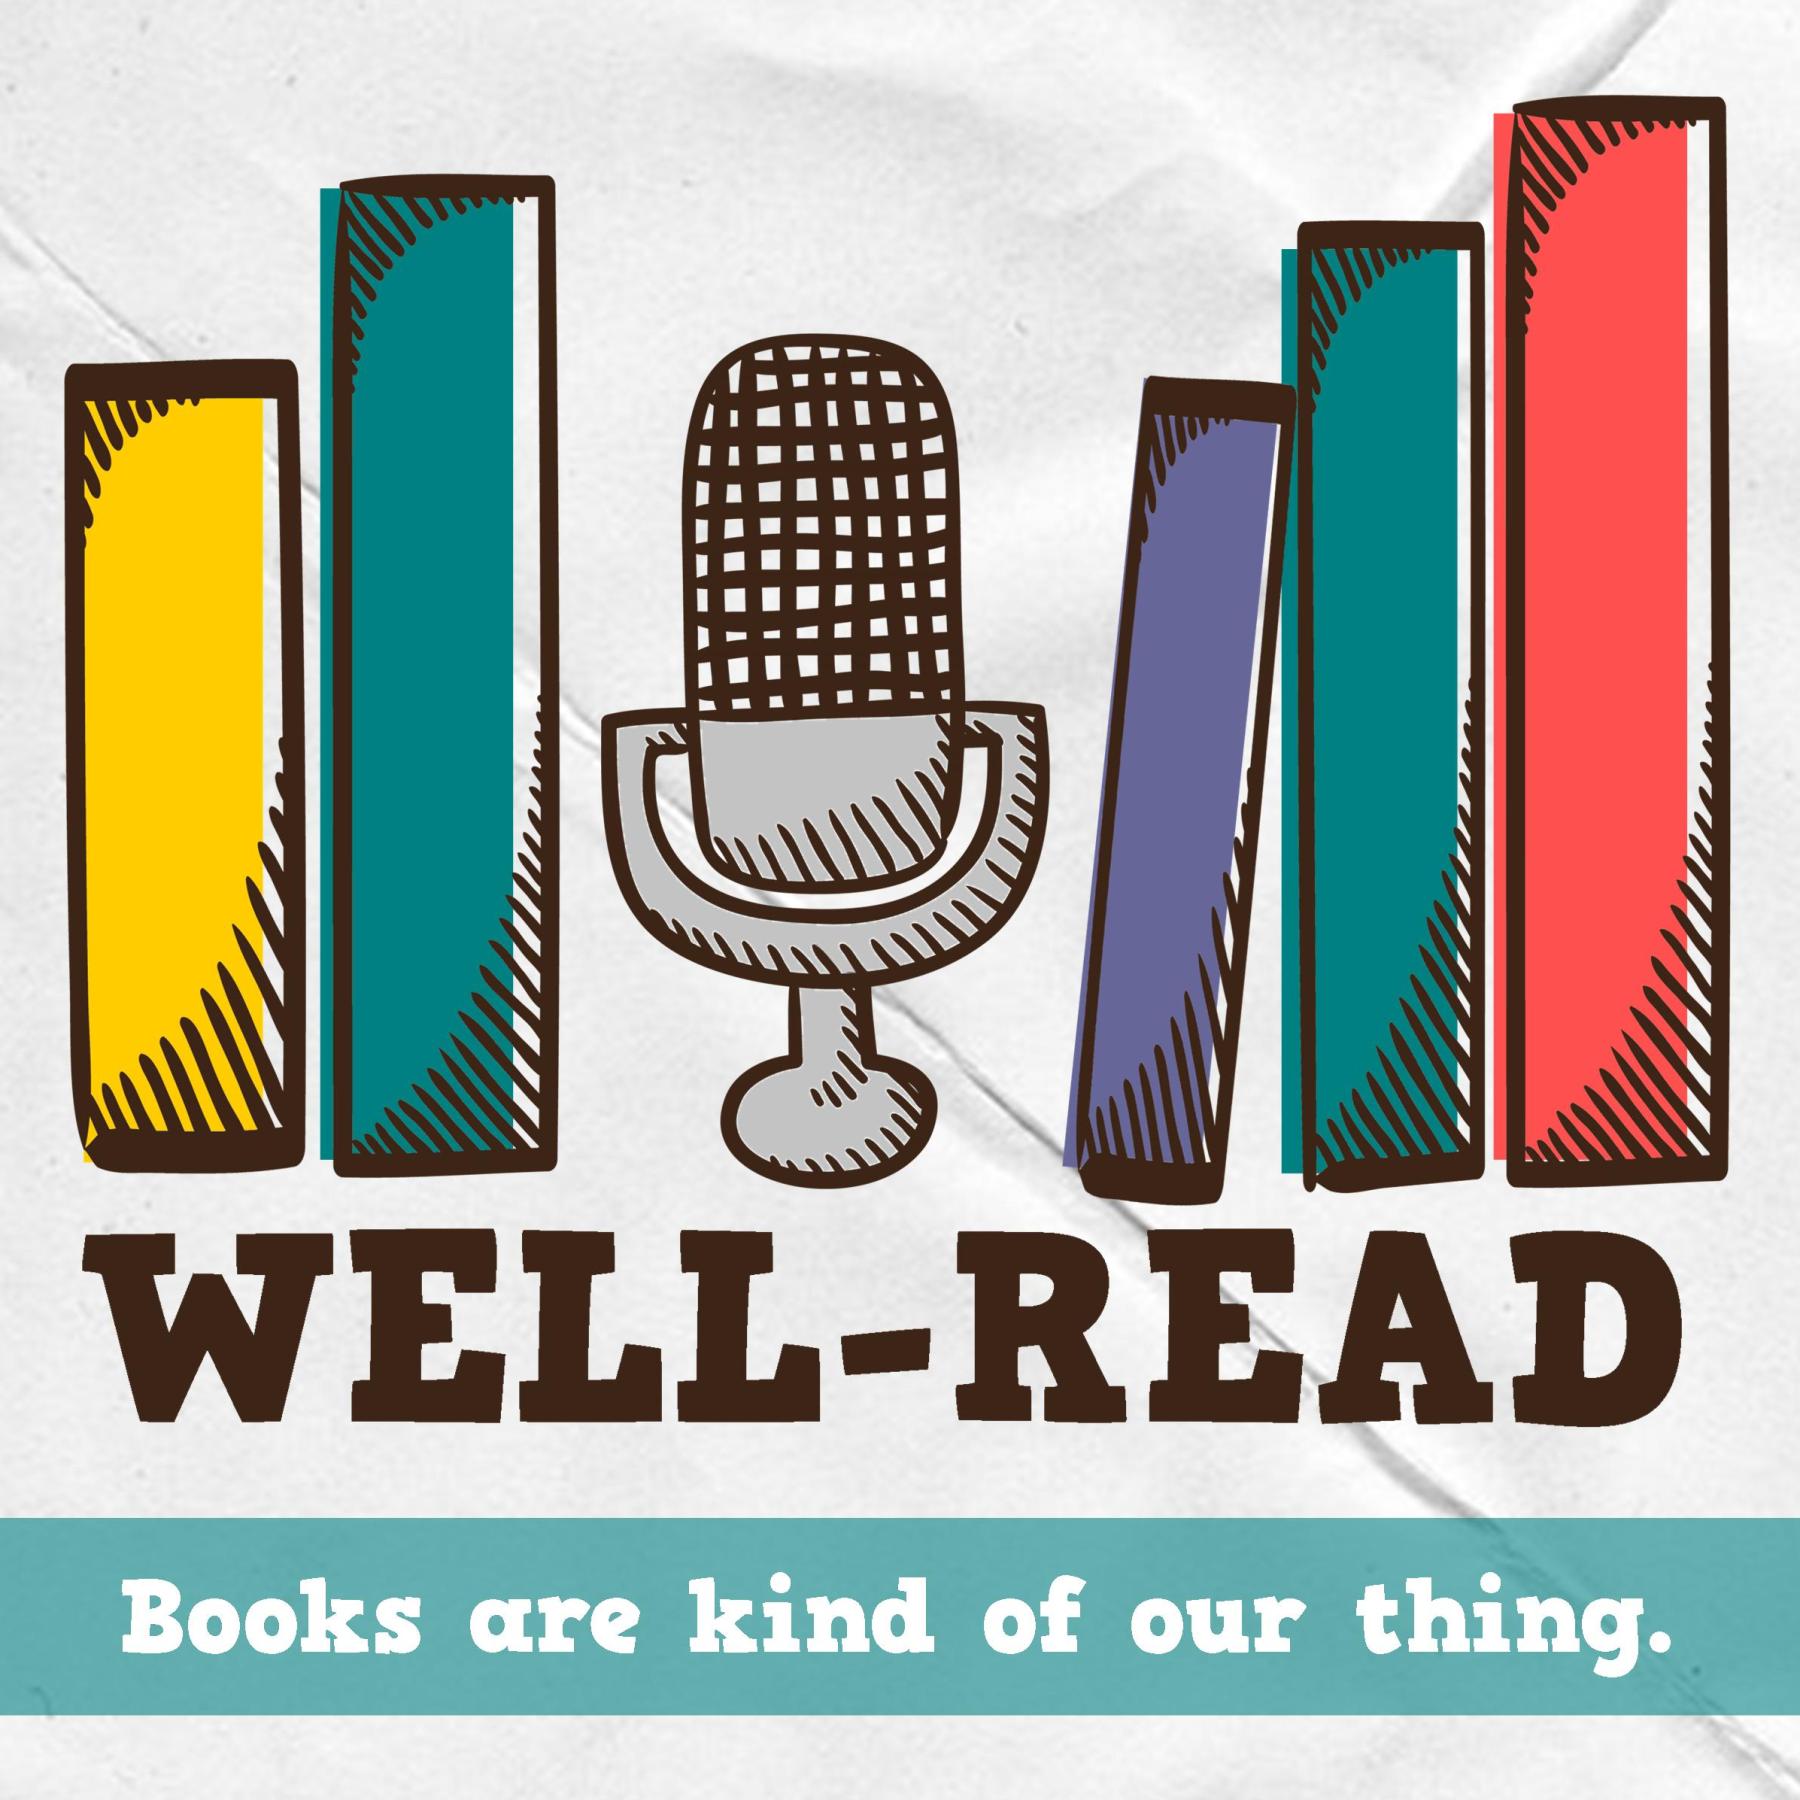 Well-Read episode #11 - Spooky Reads for Halloween